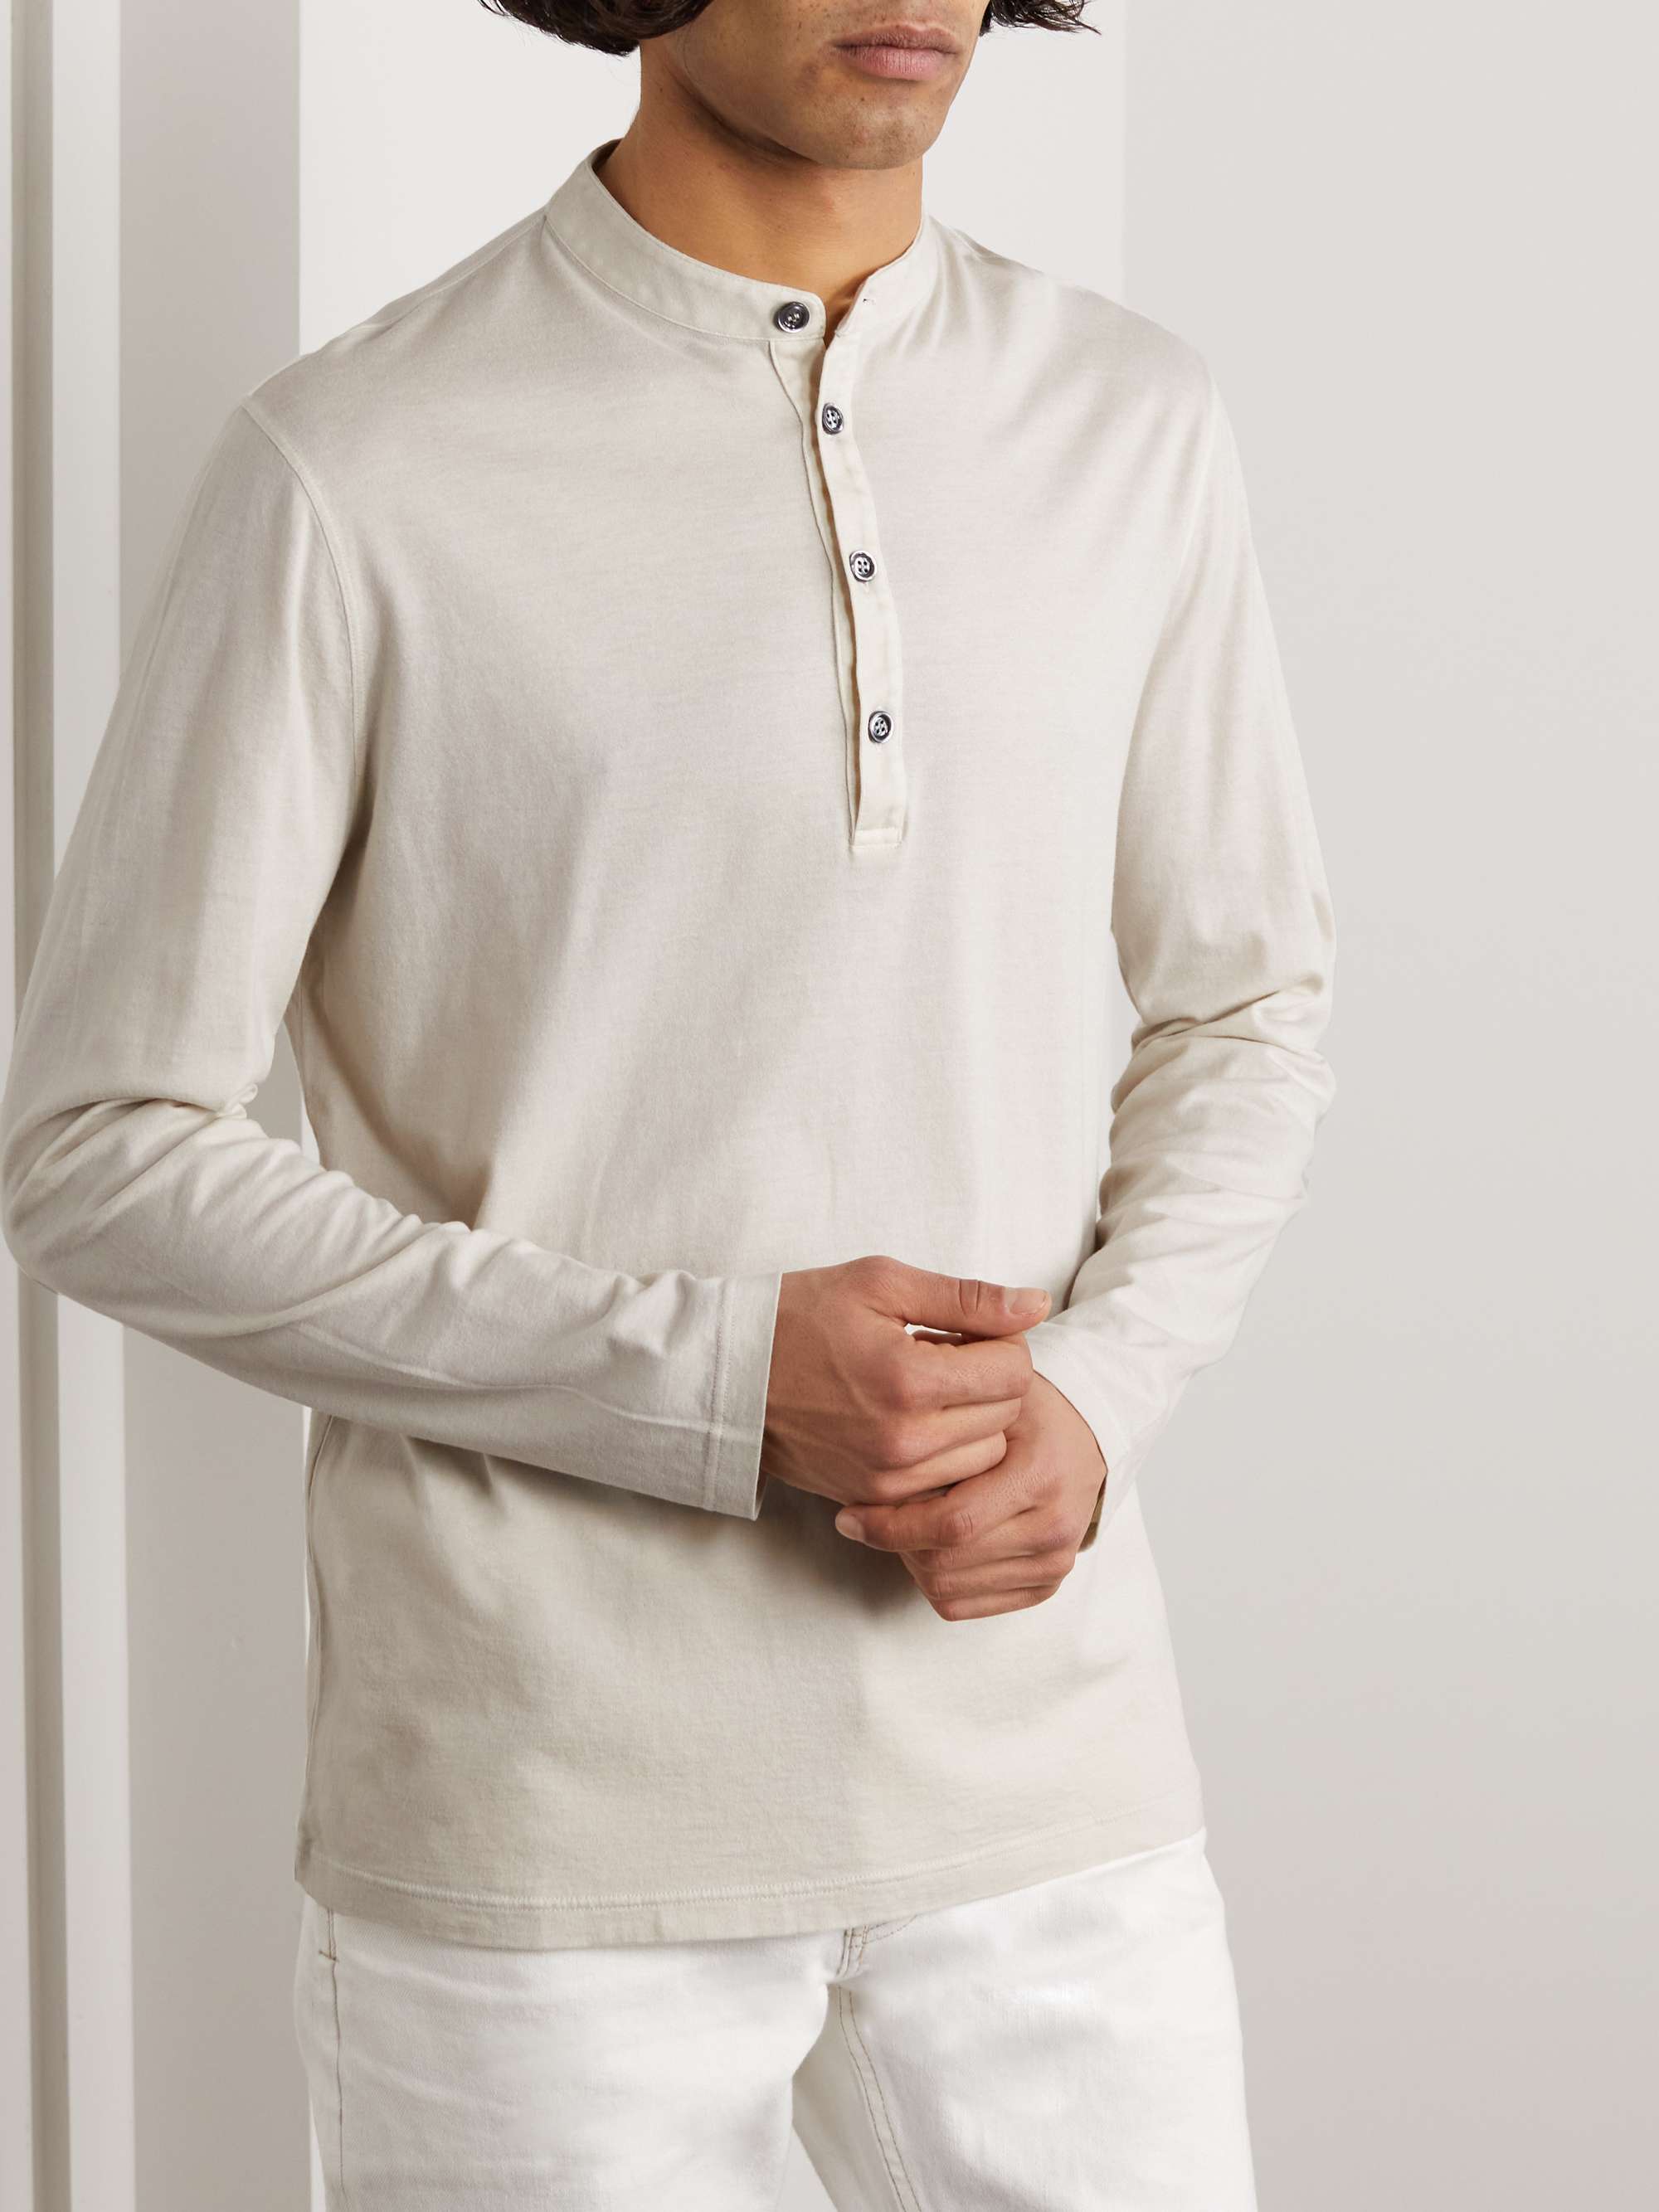 KITON Cotton and Cashmere-Blend Jersey Henley T-Shirt